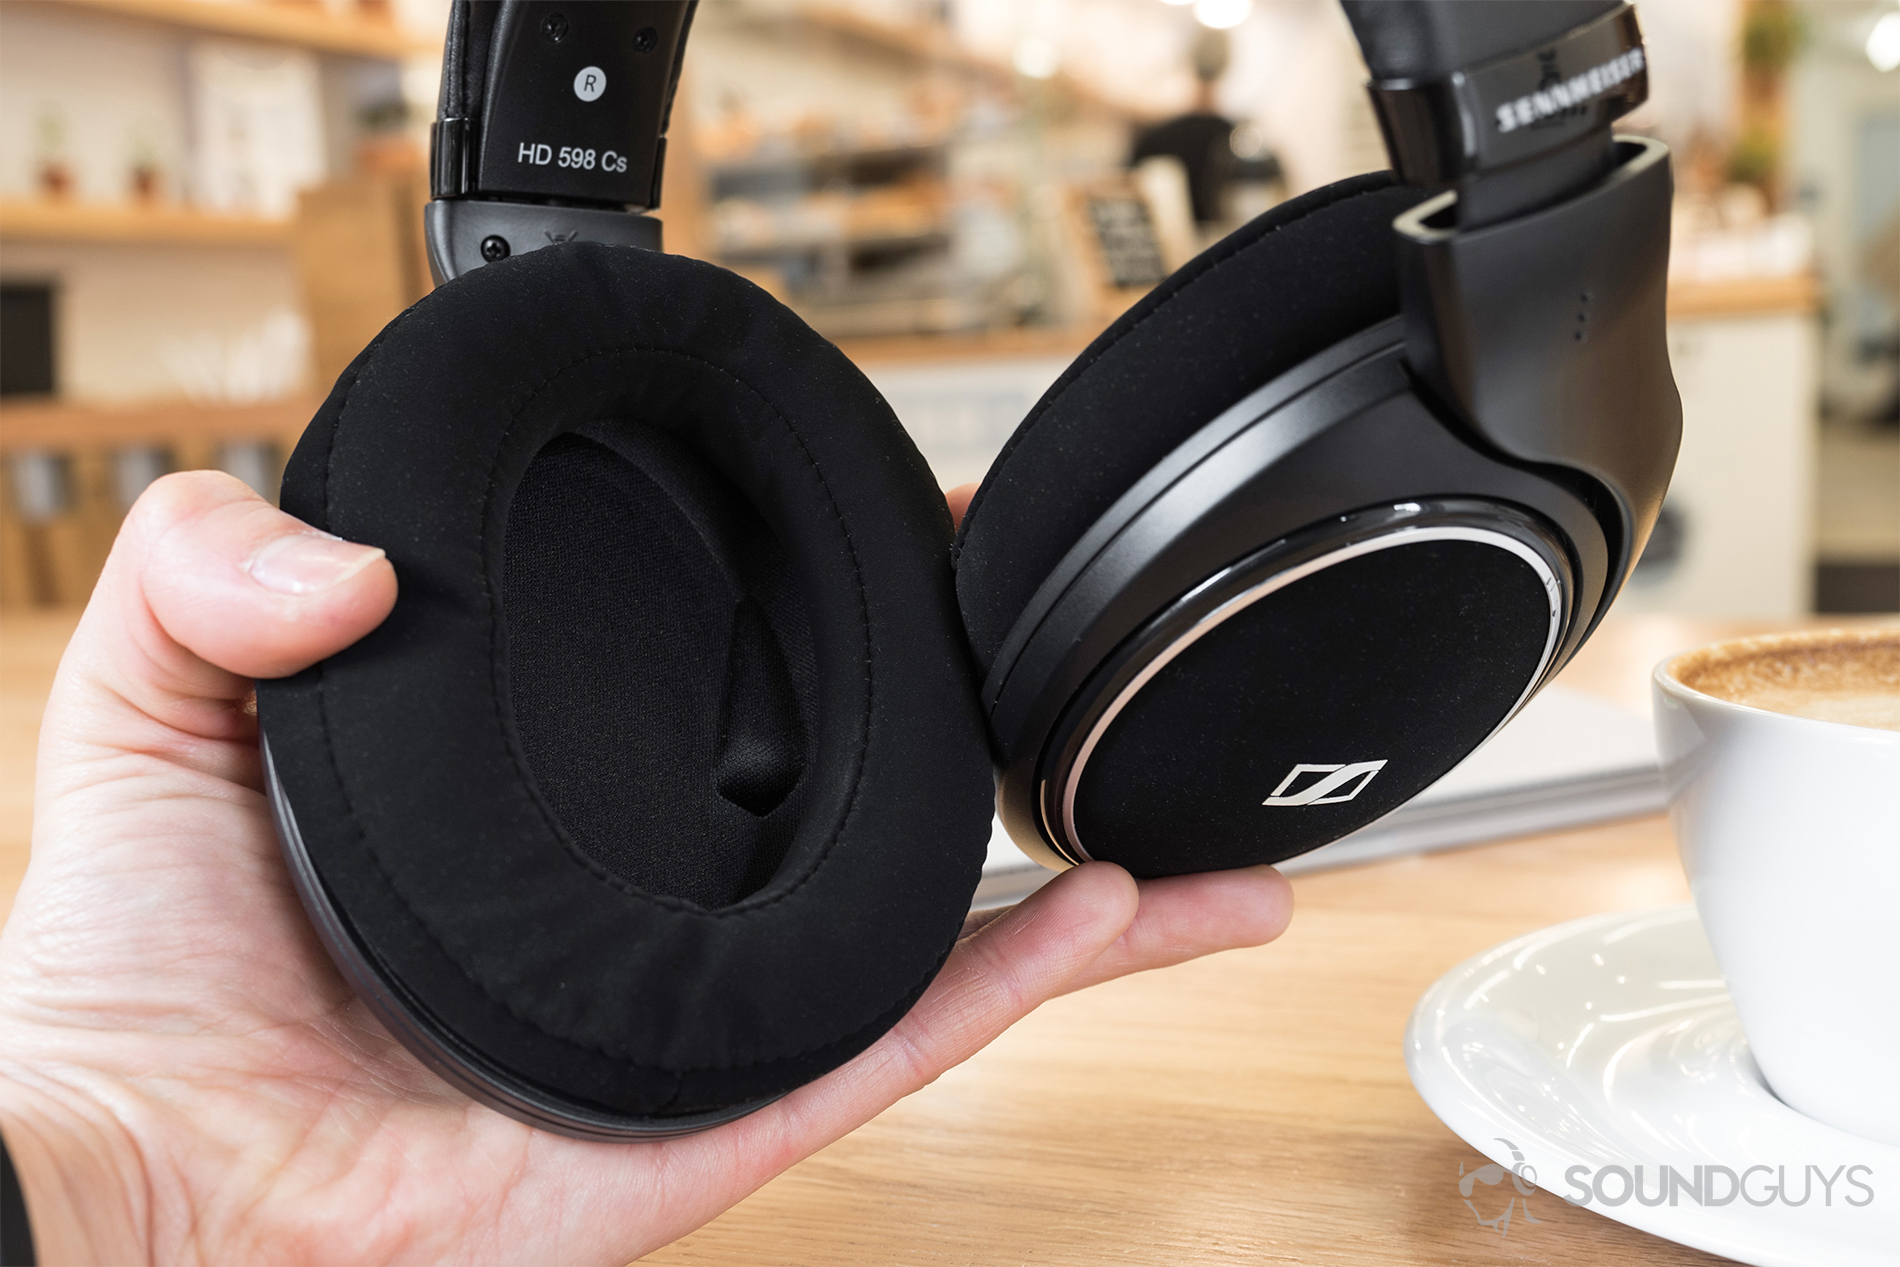 Sennheiser HD 598 CS review: The headphones in hand with the ear cups showing. Background: coffee shop with wood furnishing.